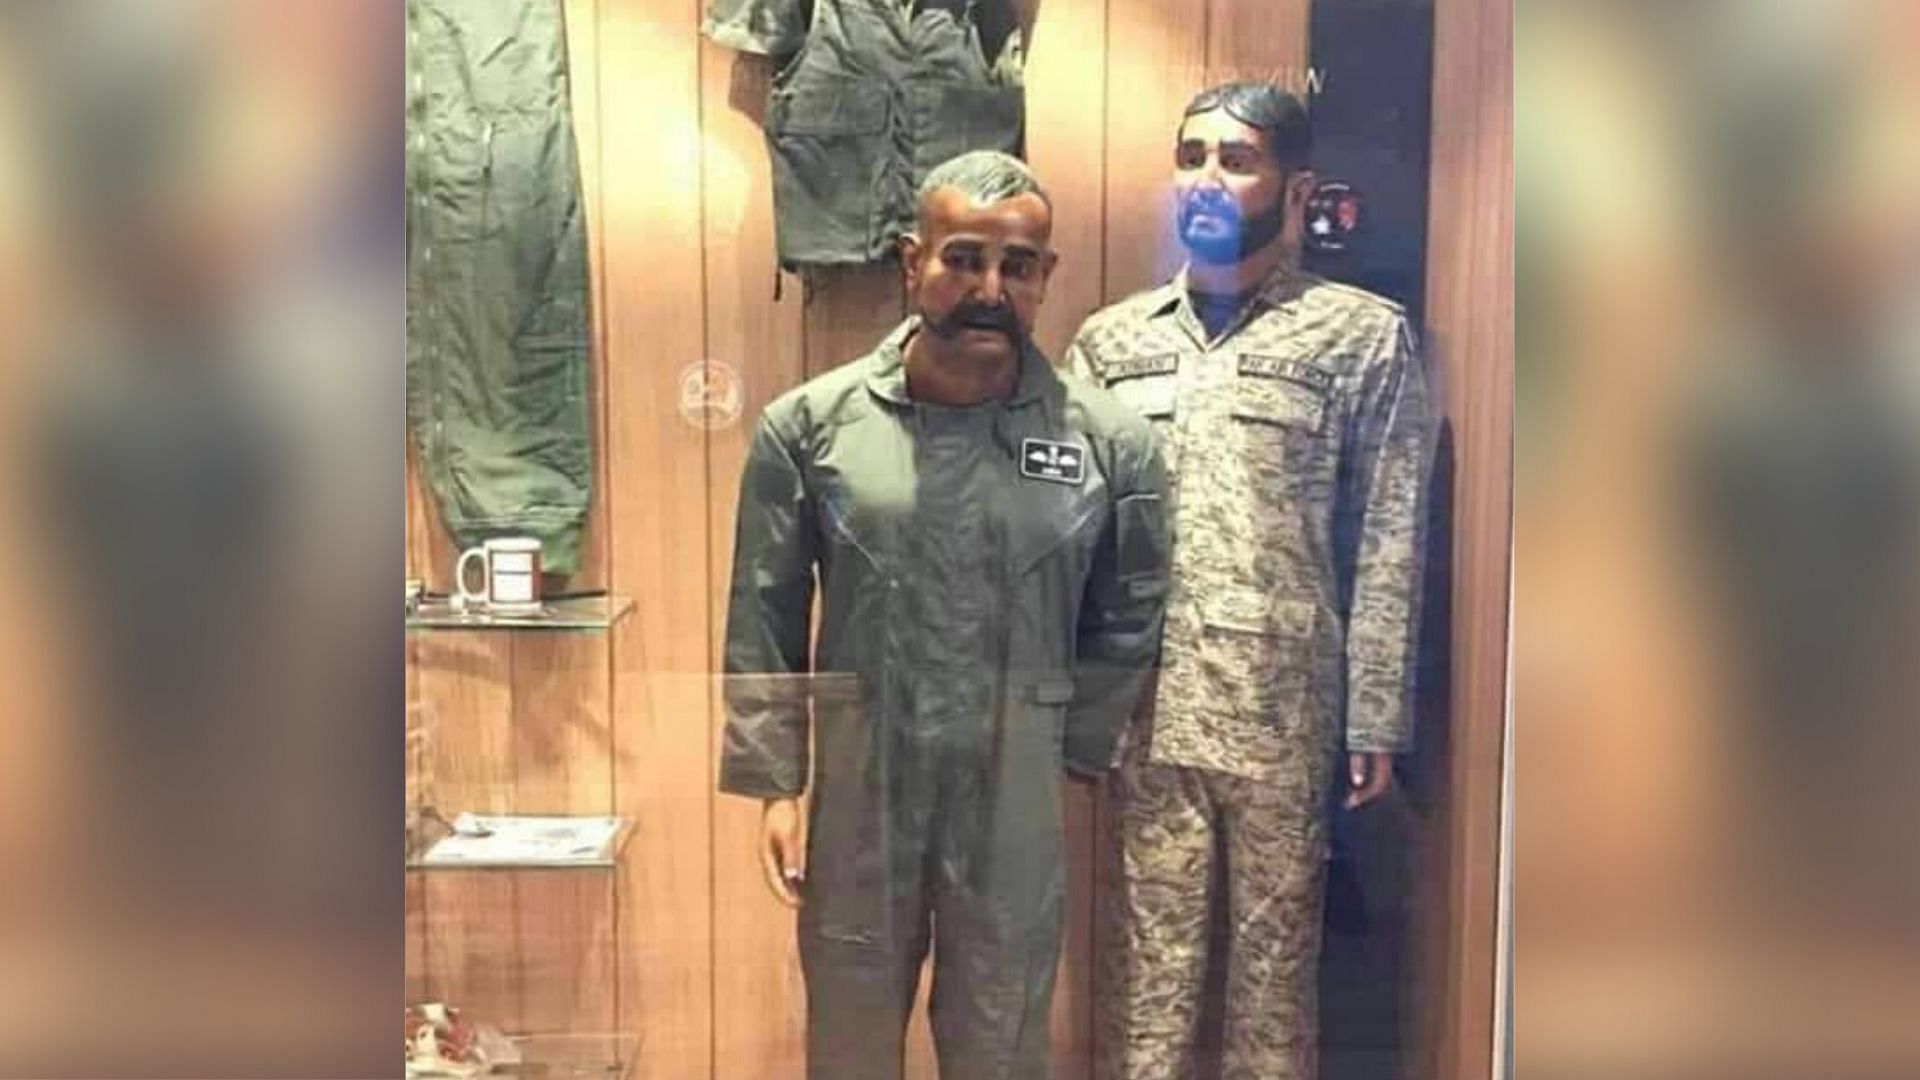 Pakistan has displayed a mannequin resembling Indian Air Force pilot Wing Commander Abhinandan Varthaman in an exhibit at a museum.&nbsp;